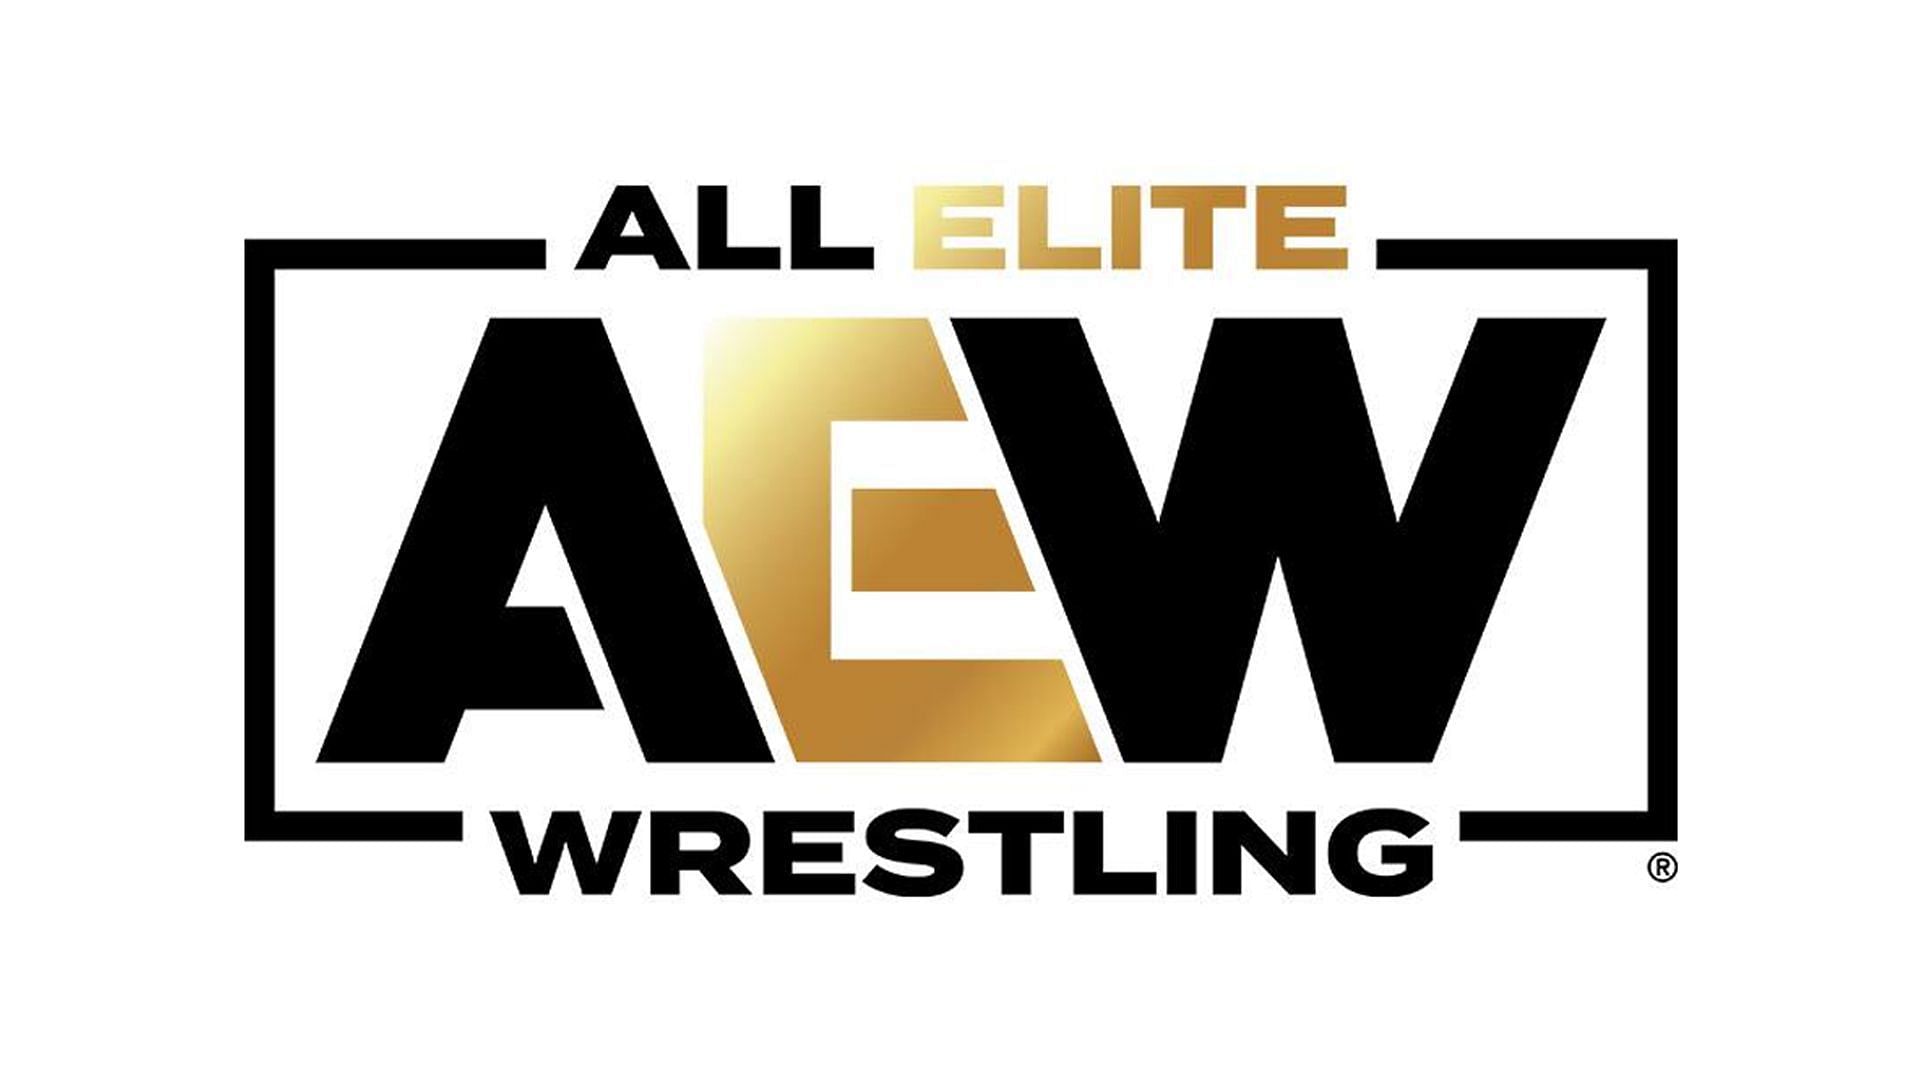 AEW has emerged as a top competitor for WWE